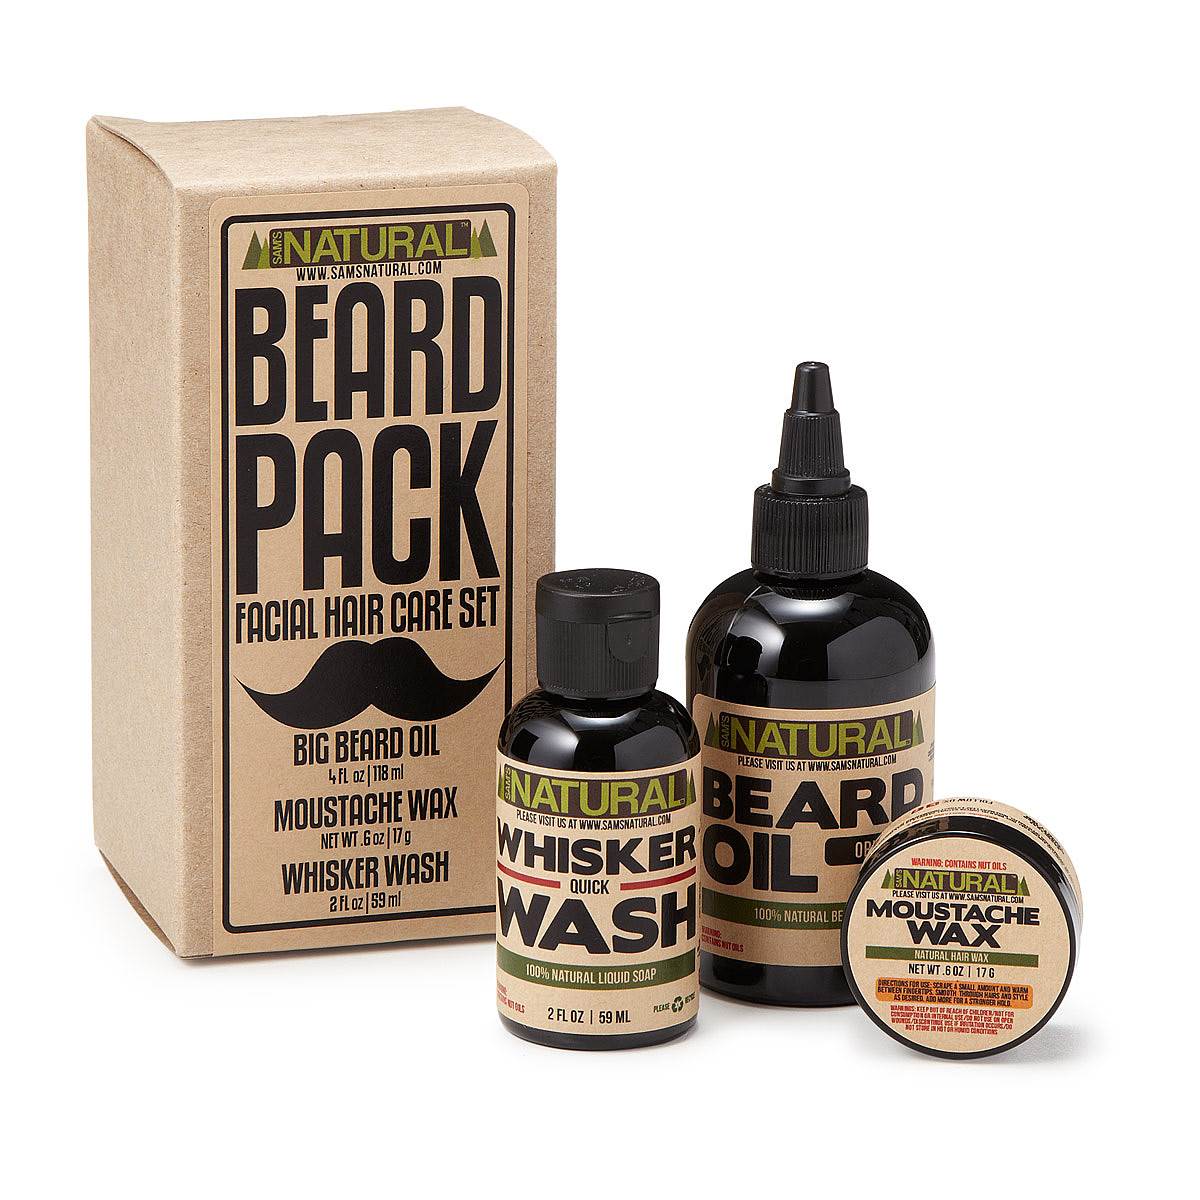 Uncommon Goods Beard pack - Gifts for the Groom as featured on The National Vintage Wedding Fair blog